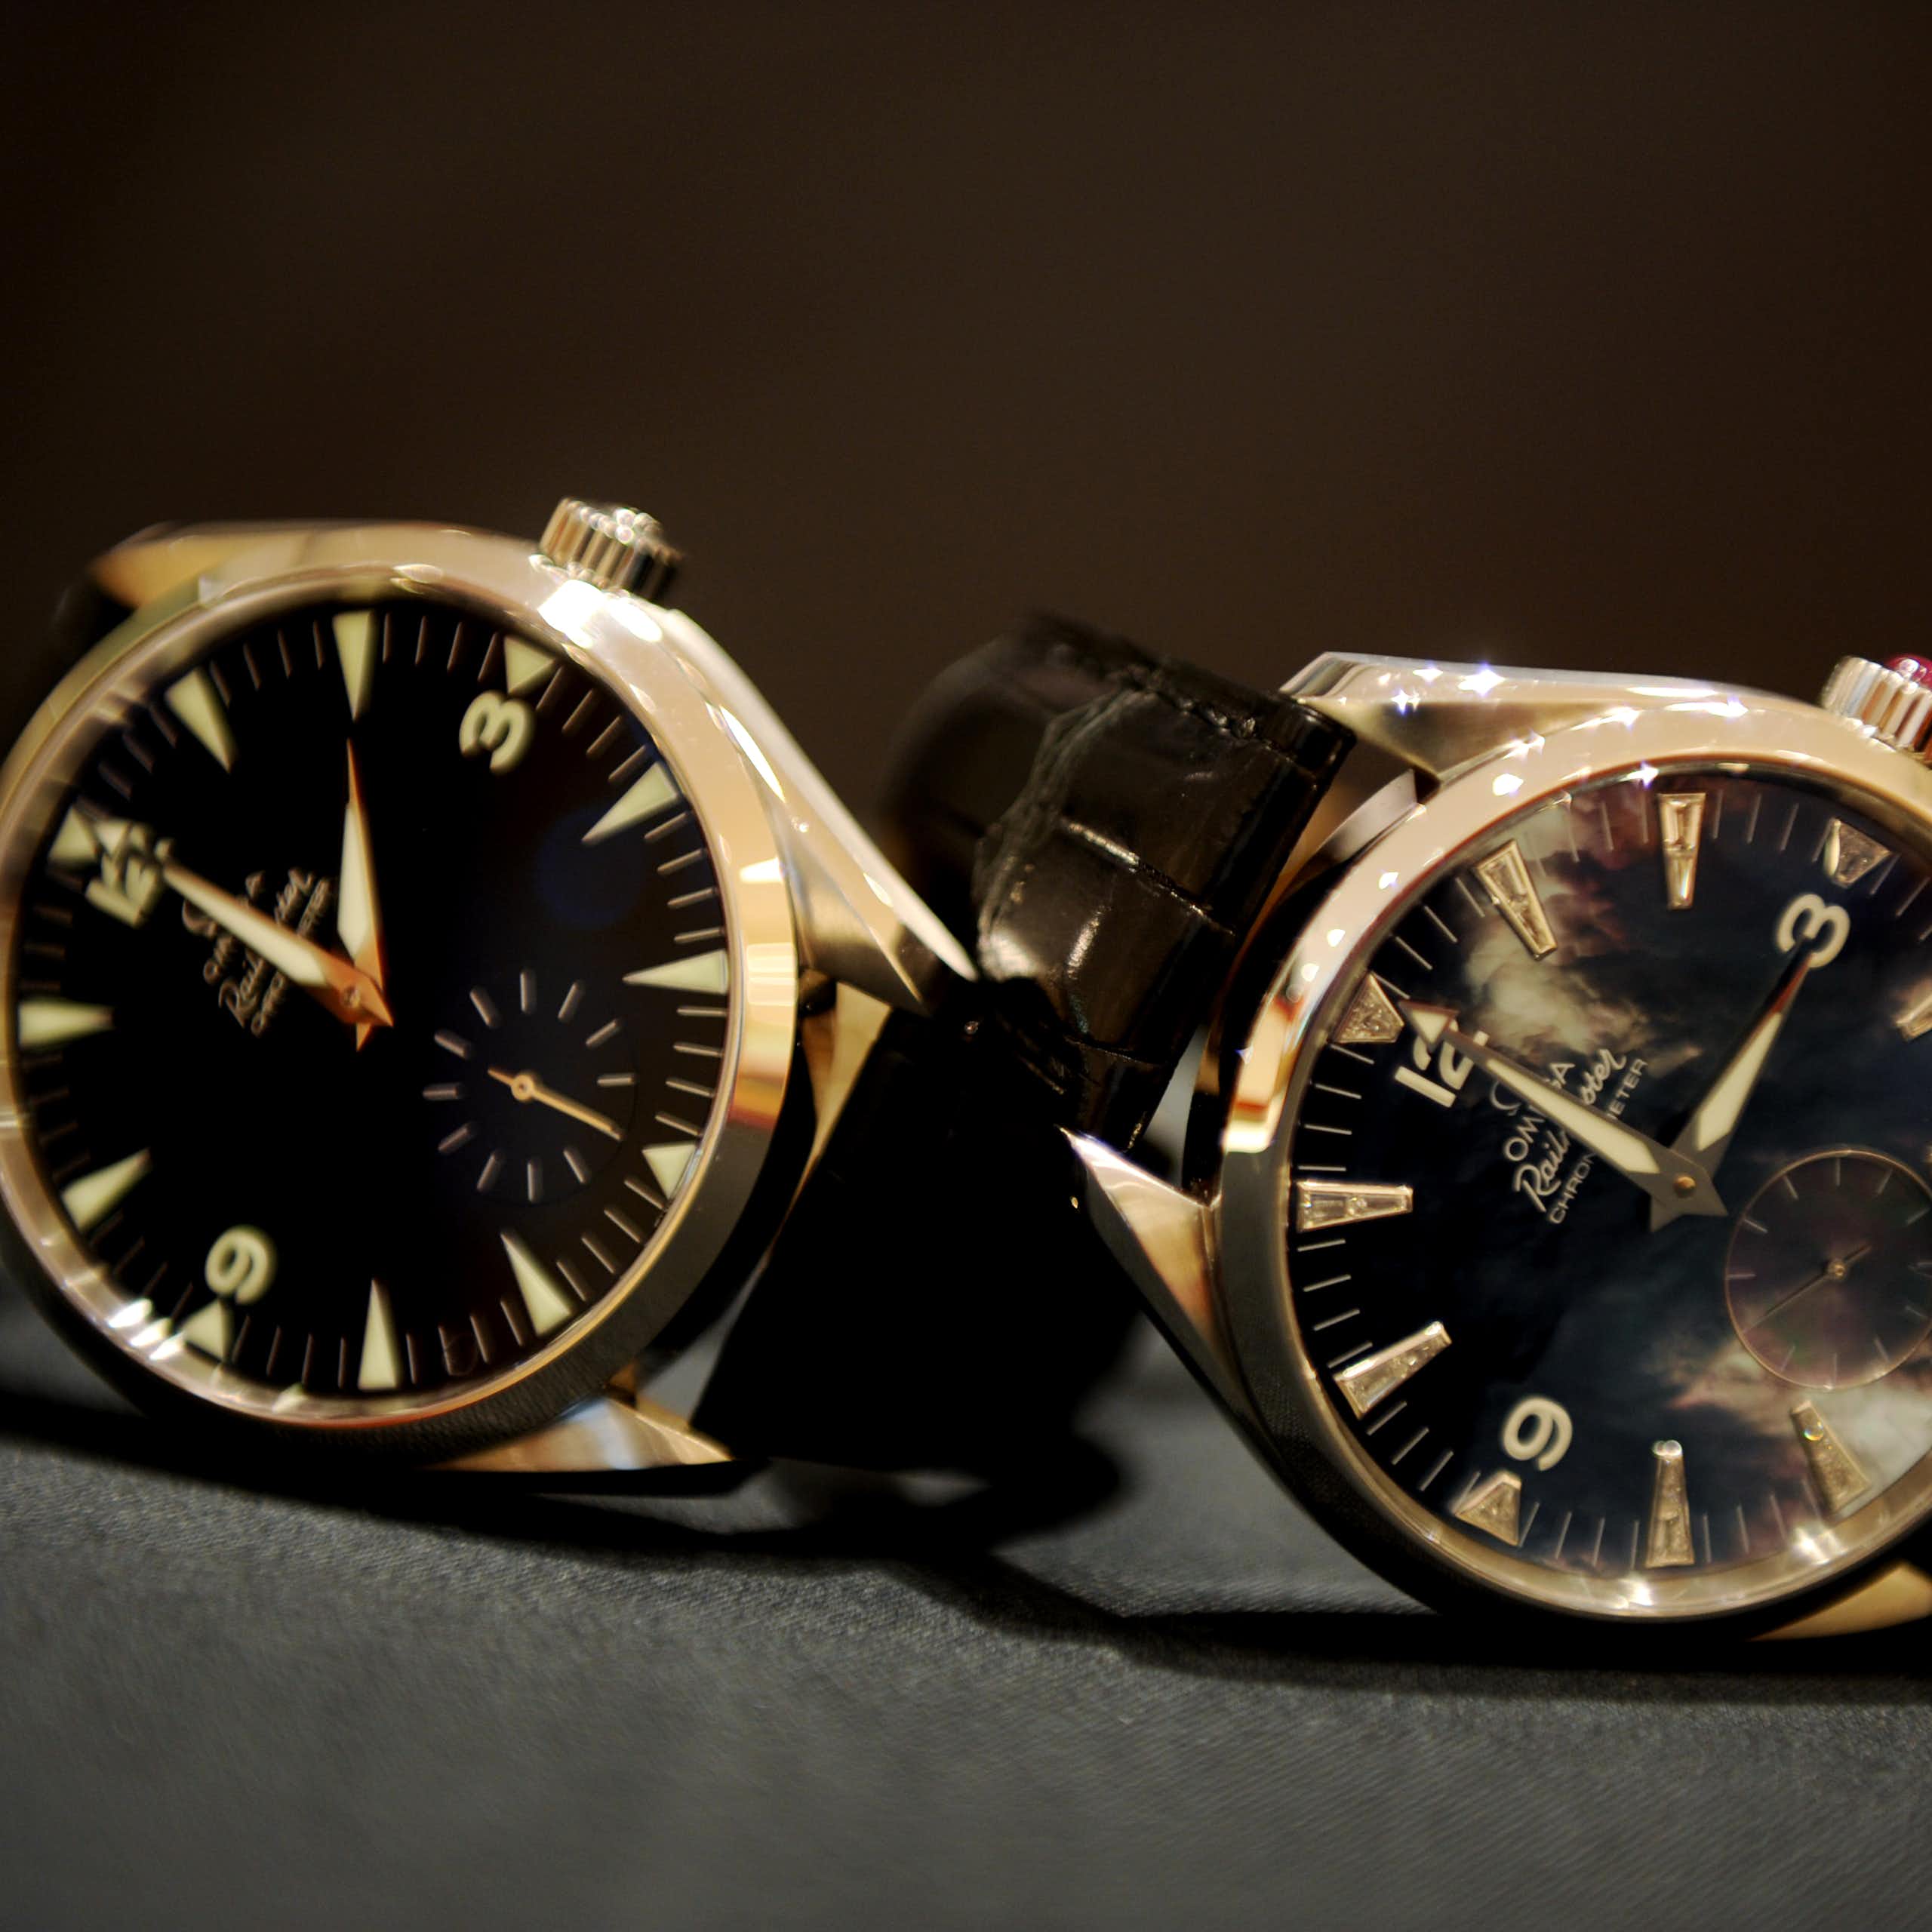 Two watches with clock faces showing the two times before and after daylight saving changes